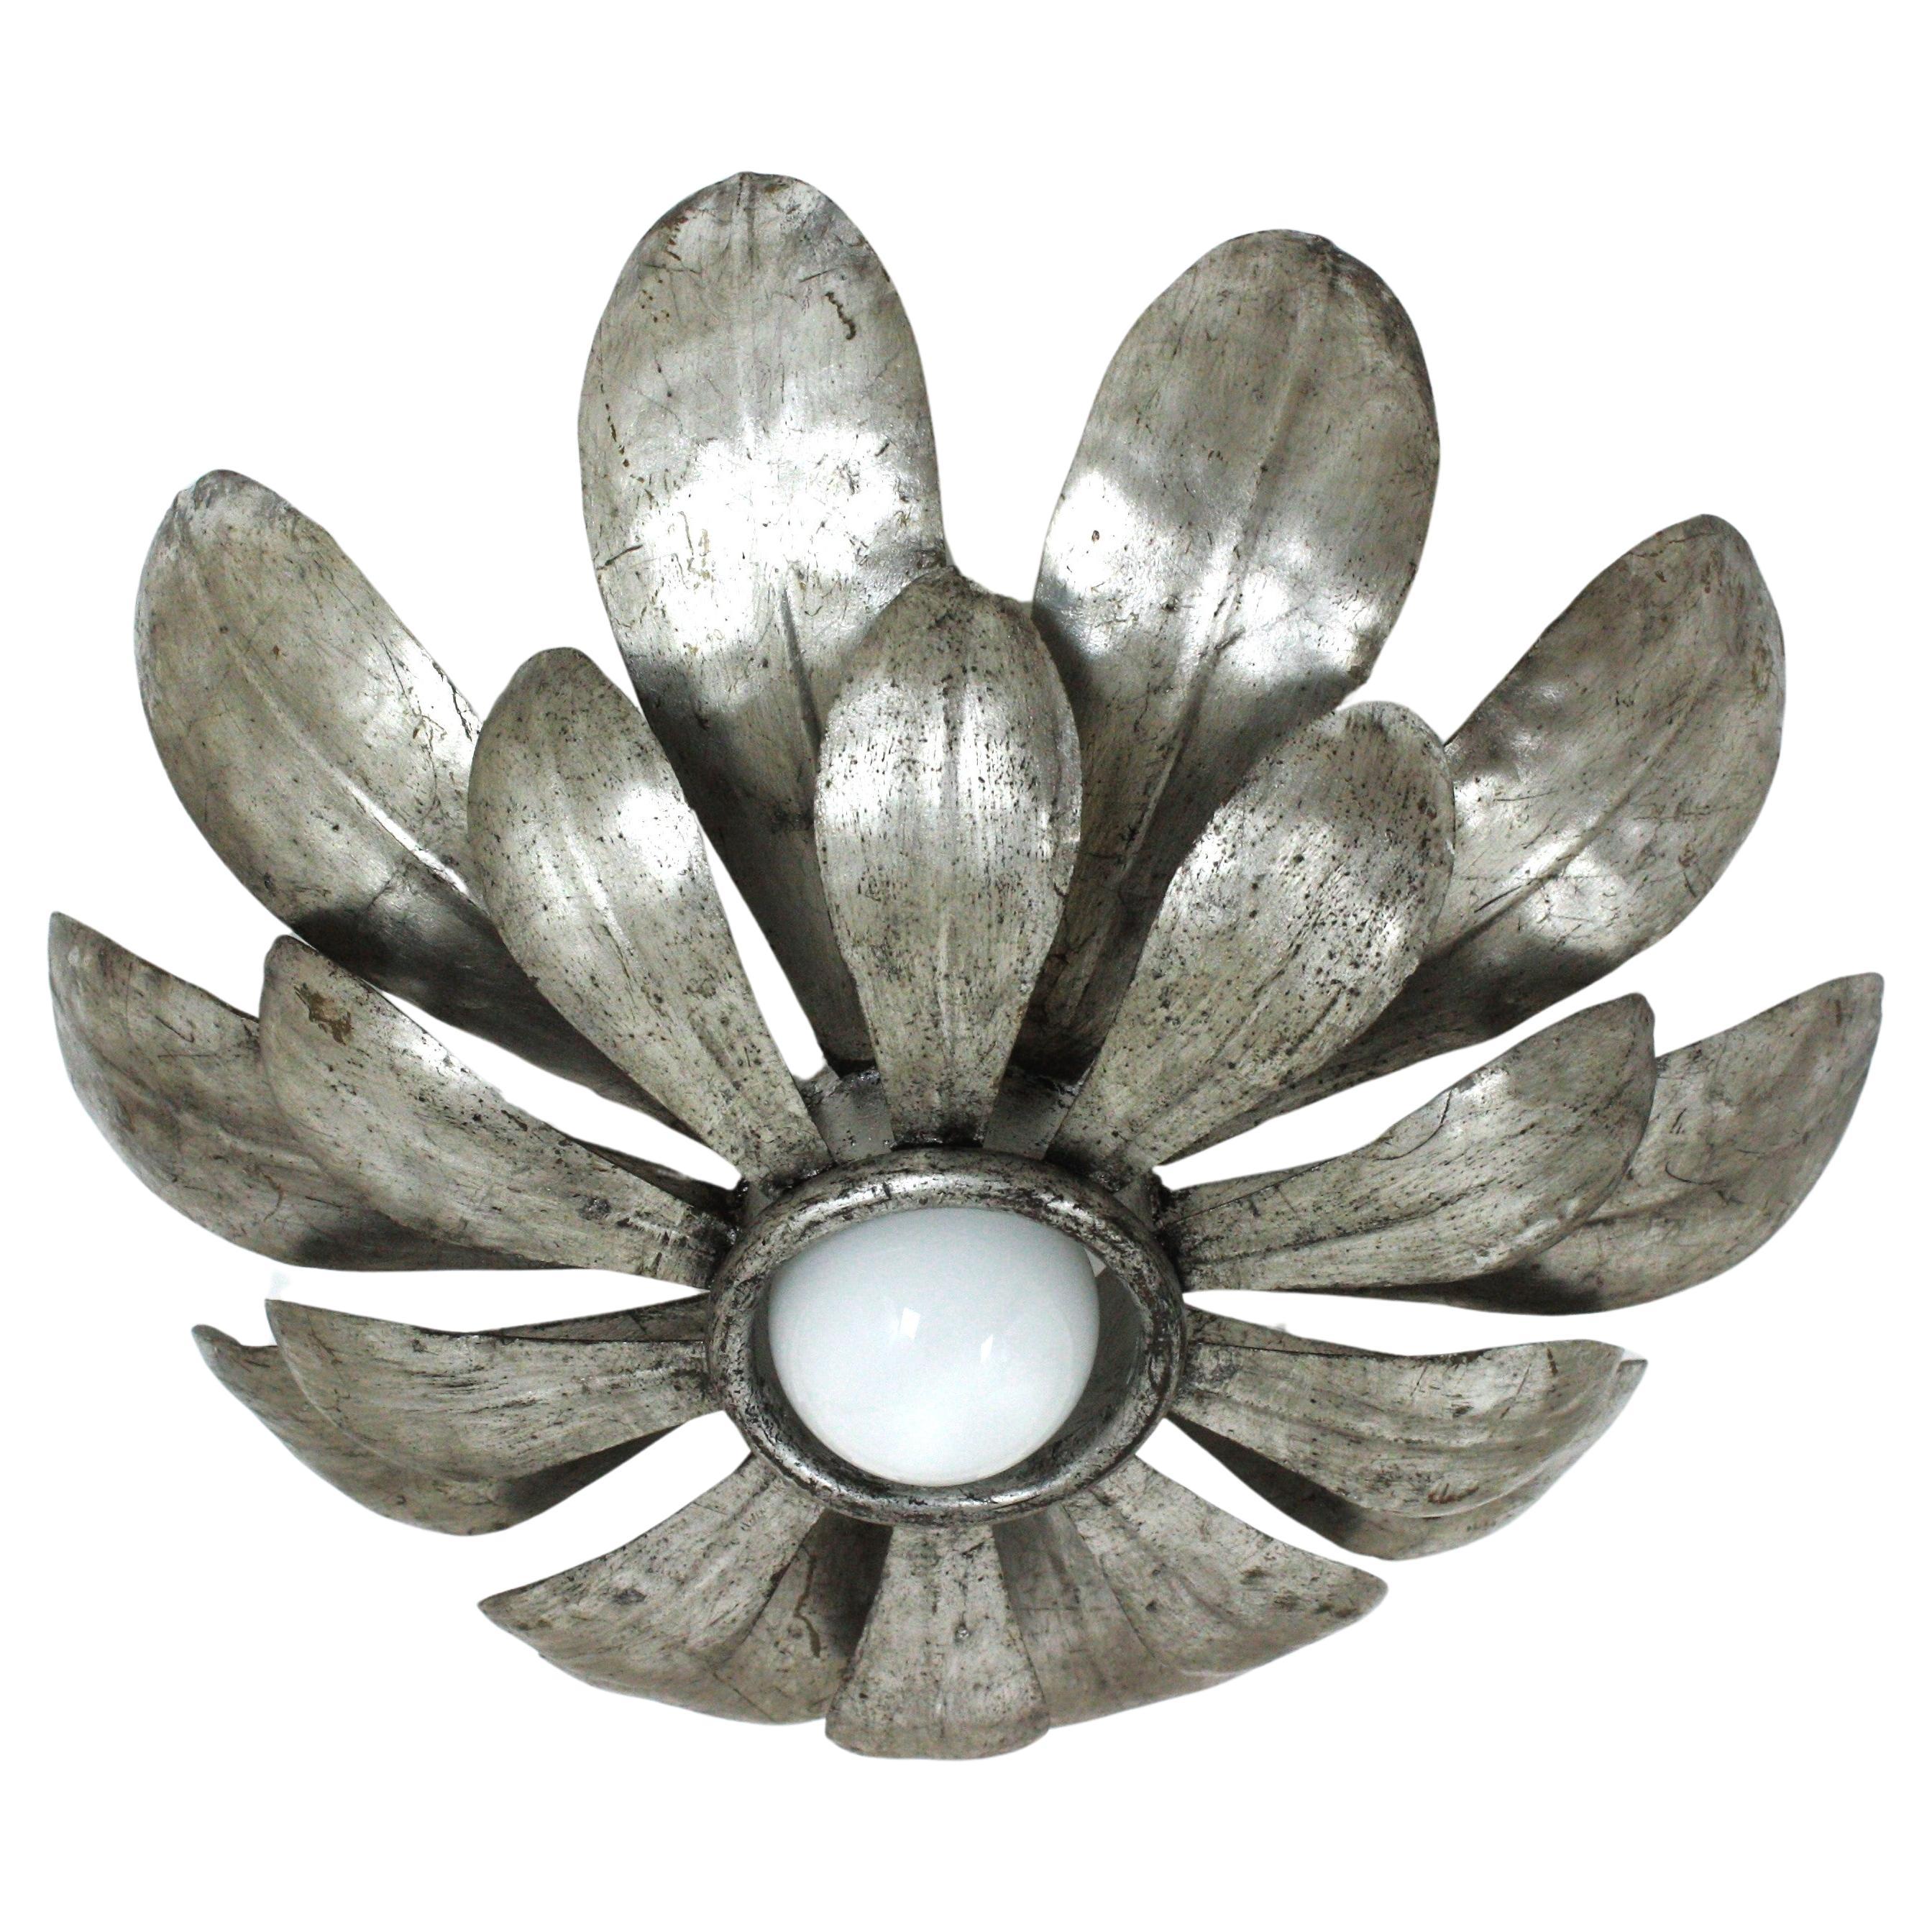 French Flower Sunburst Silvered Metal Flush Mount
One of a kind Hollywood Regency double layered sunburst floral flushmount or light fixture, France, 1950
Rare find.
Produced at the Mid-Century Modern Period in the style of Hollywood Regency.
This